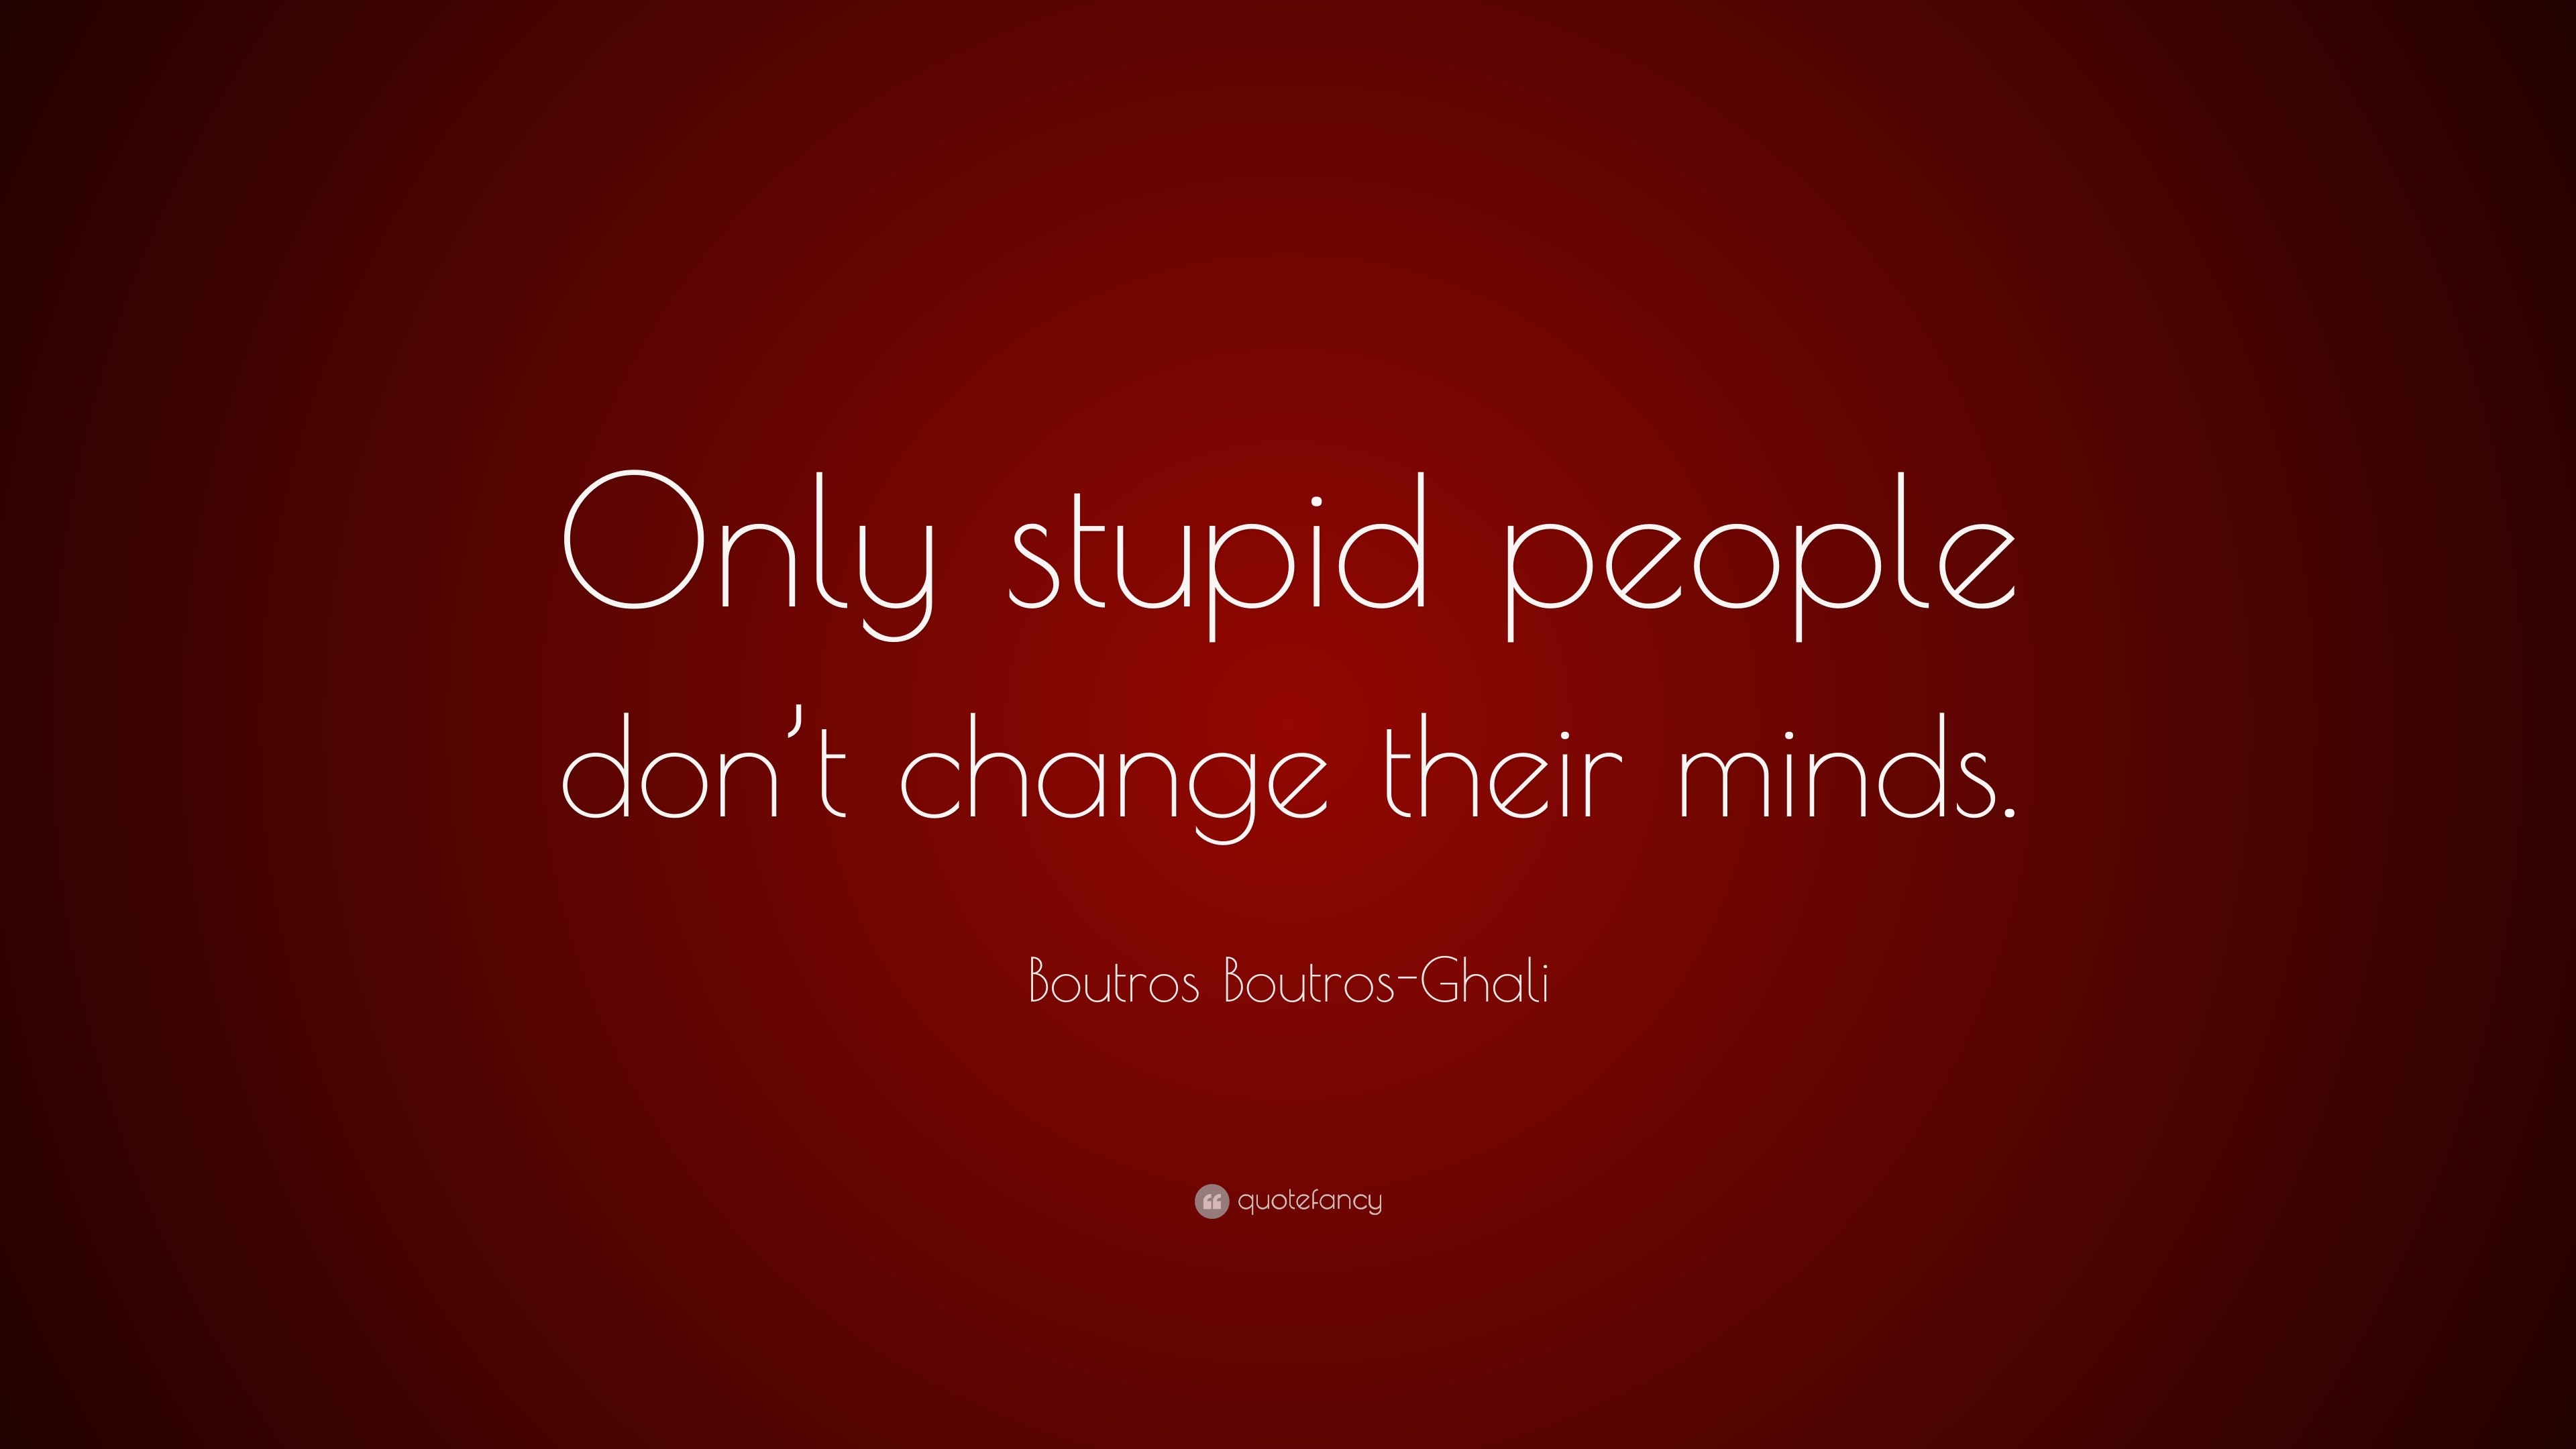 3840x2160 Boutros Boutros-Ghali Quote: “Only stupid people don't change their minds